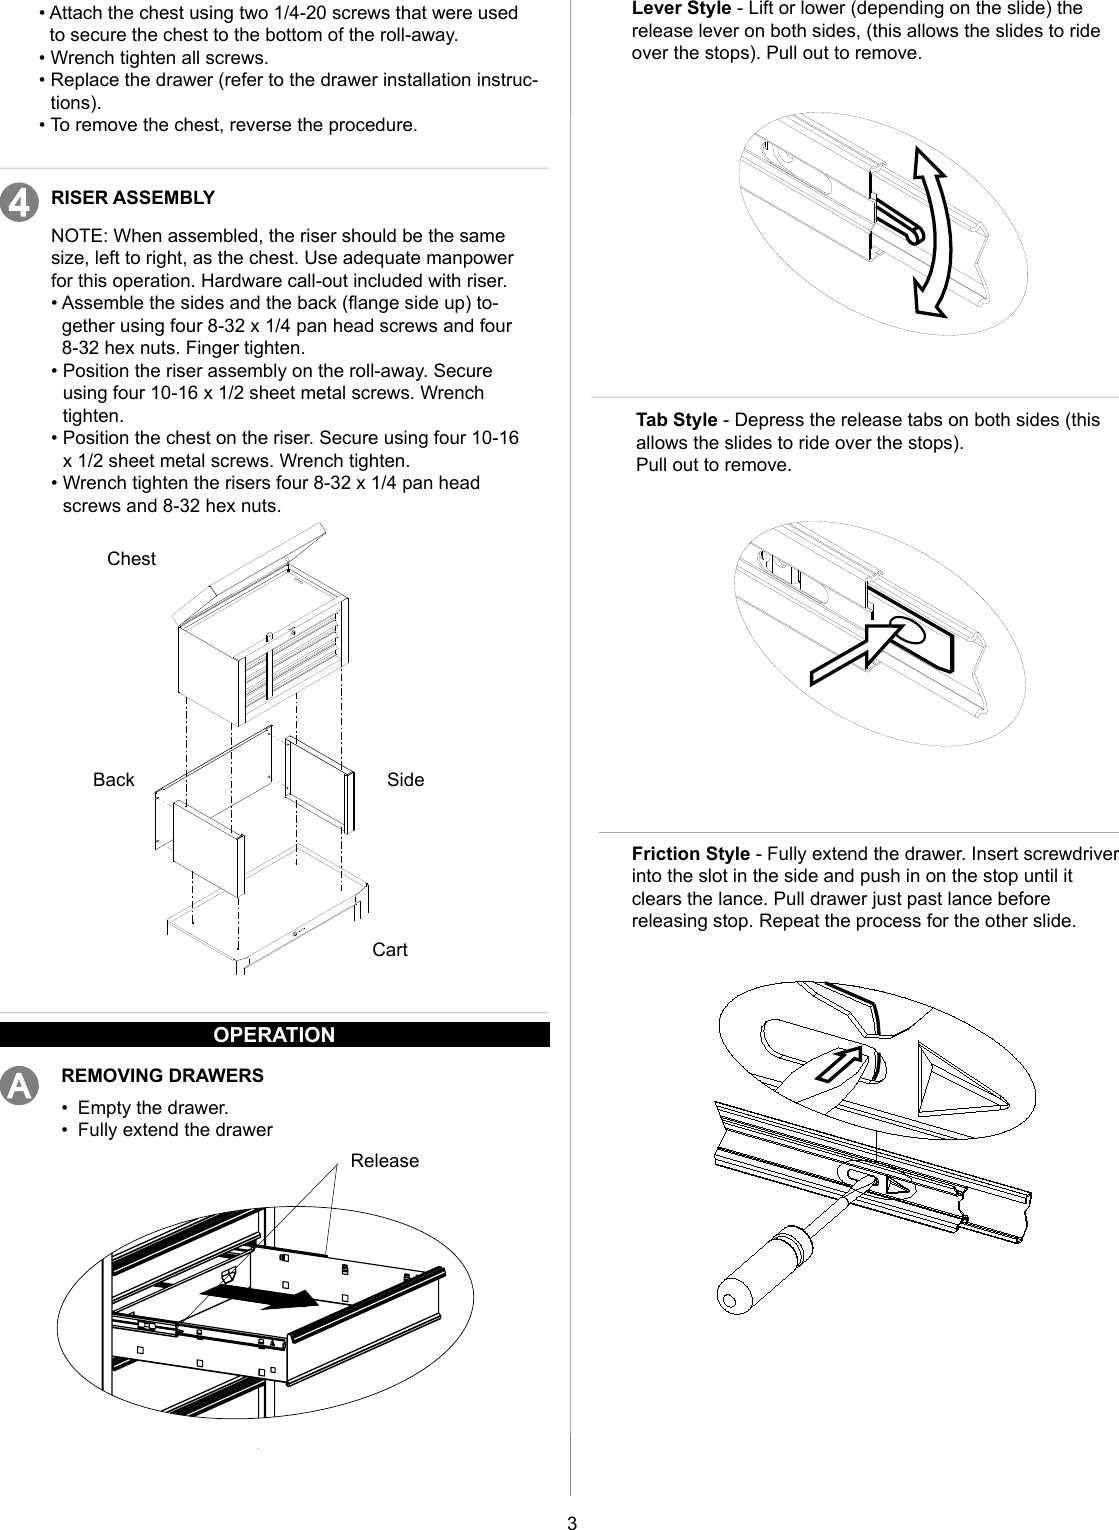 Page 3 of 8 - Craftsman Craftsman-5-Drawer-Standard-Duty-Ball-Bearing-Tool-Center-Black-Use-And-Care-Manual-  Craftsman-5-drawer-standard-duty-ball-bearing-tool-center-black-use-and-care-manual